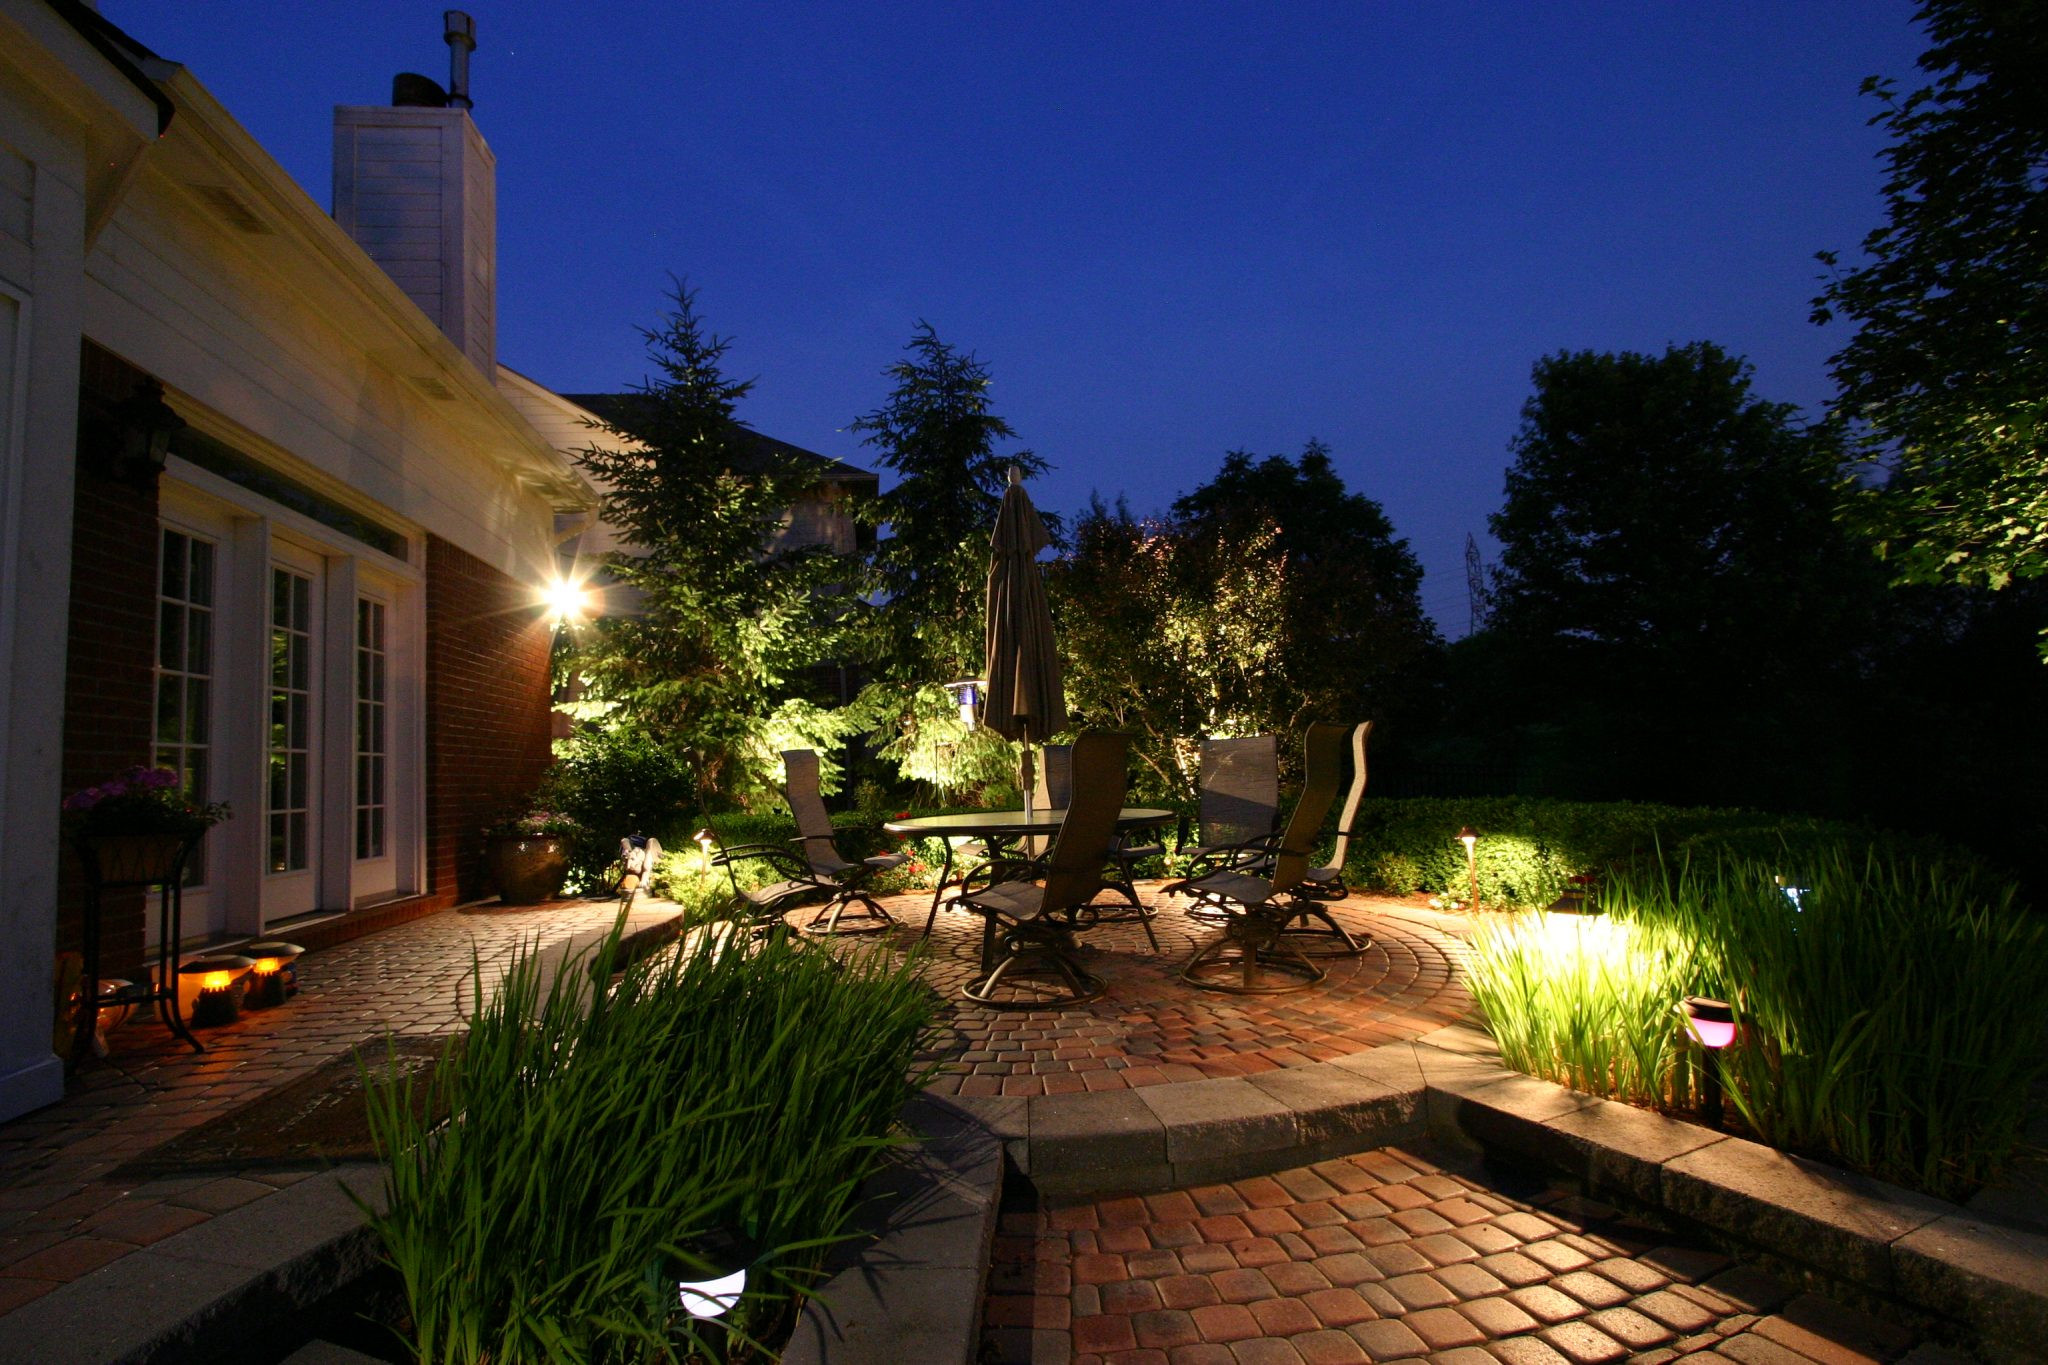 Backyard at Night Luxury Gallery Berns Landscaping Services